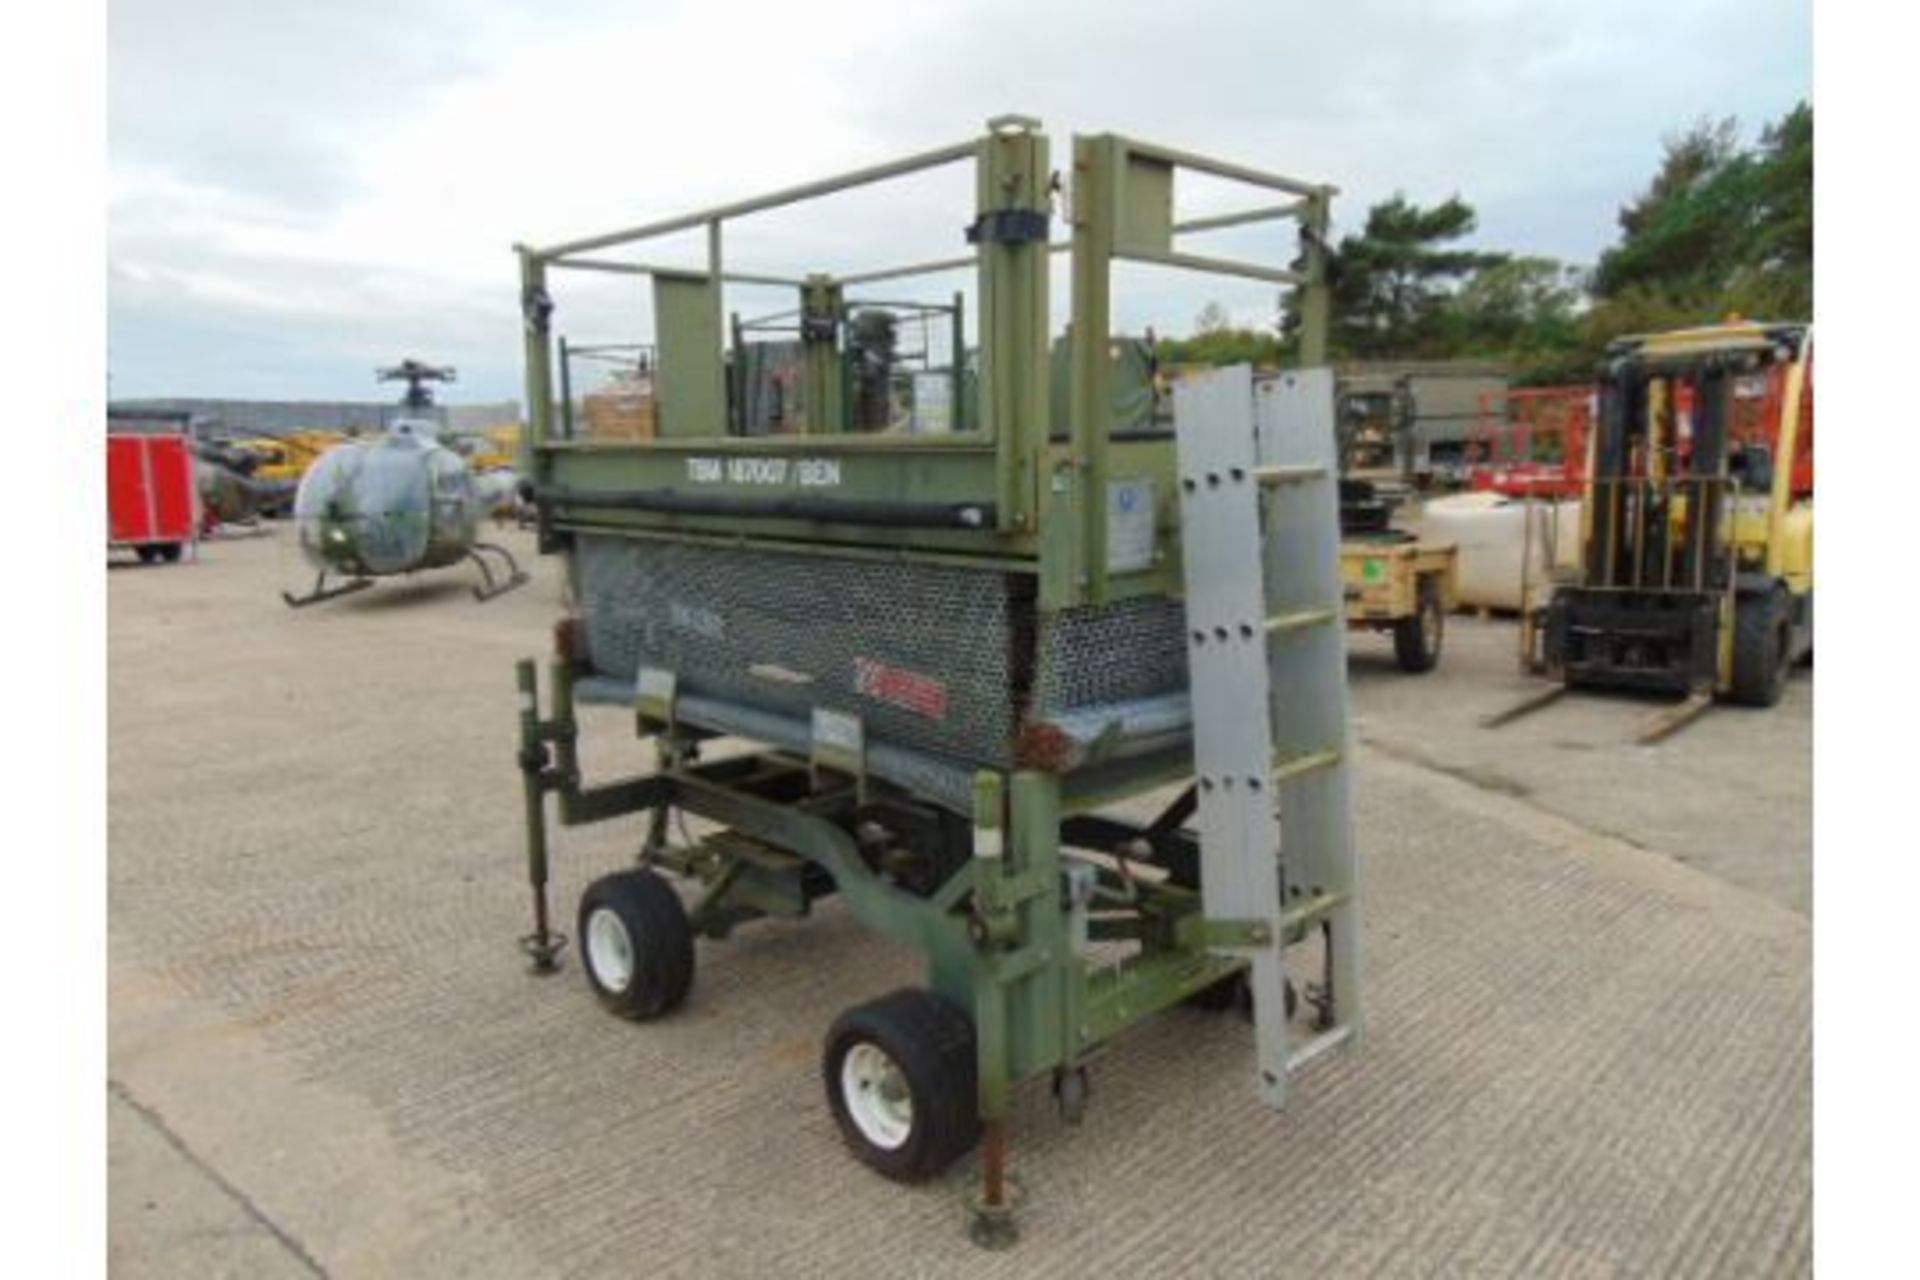 UK Lift Aircraft Hydraulic Access Platform from RAF as Shown - Image 4 of 11